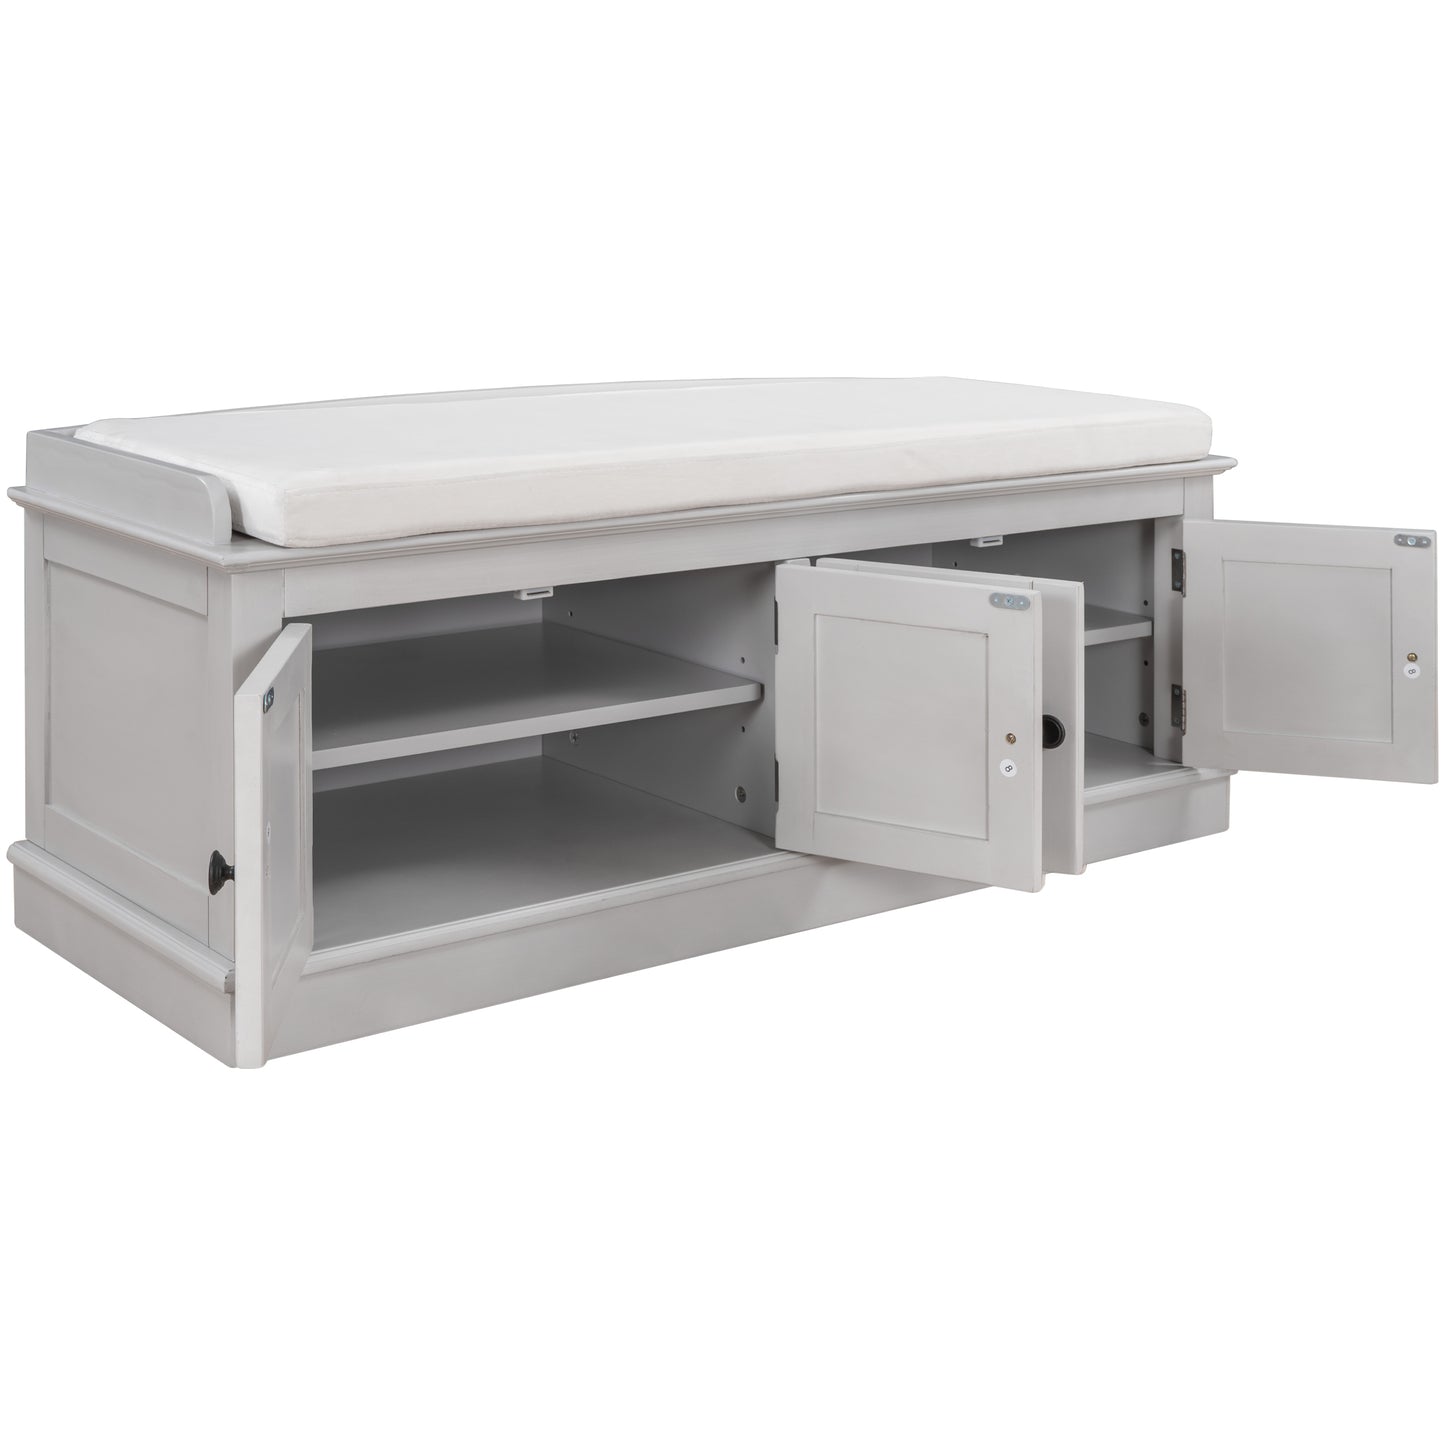 TREXM Storage Bench with 4 Doors and Adjustable Shelves - Gray